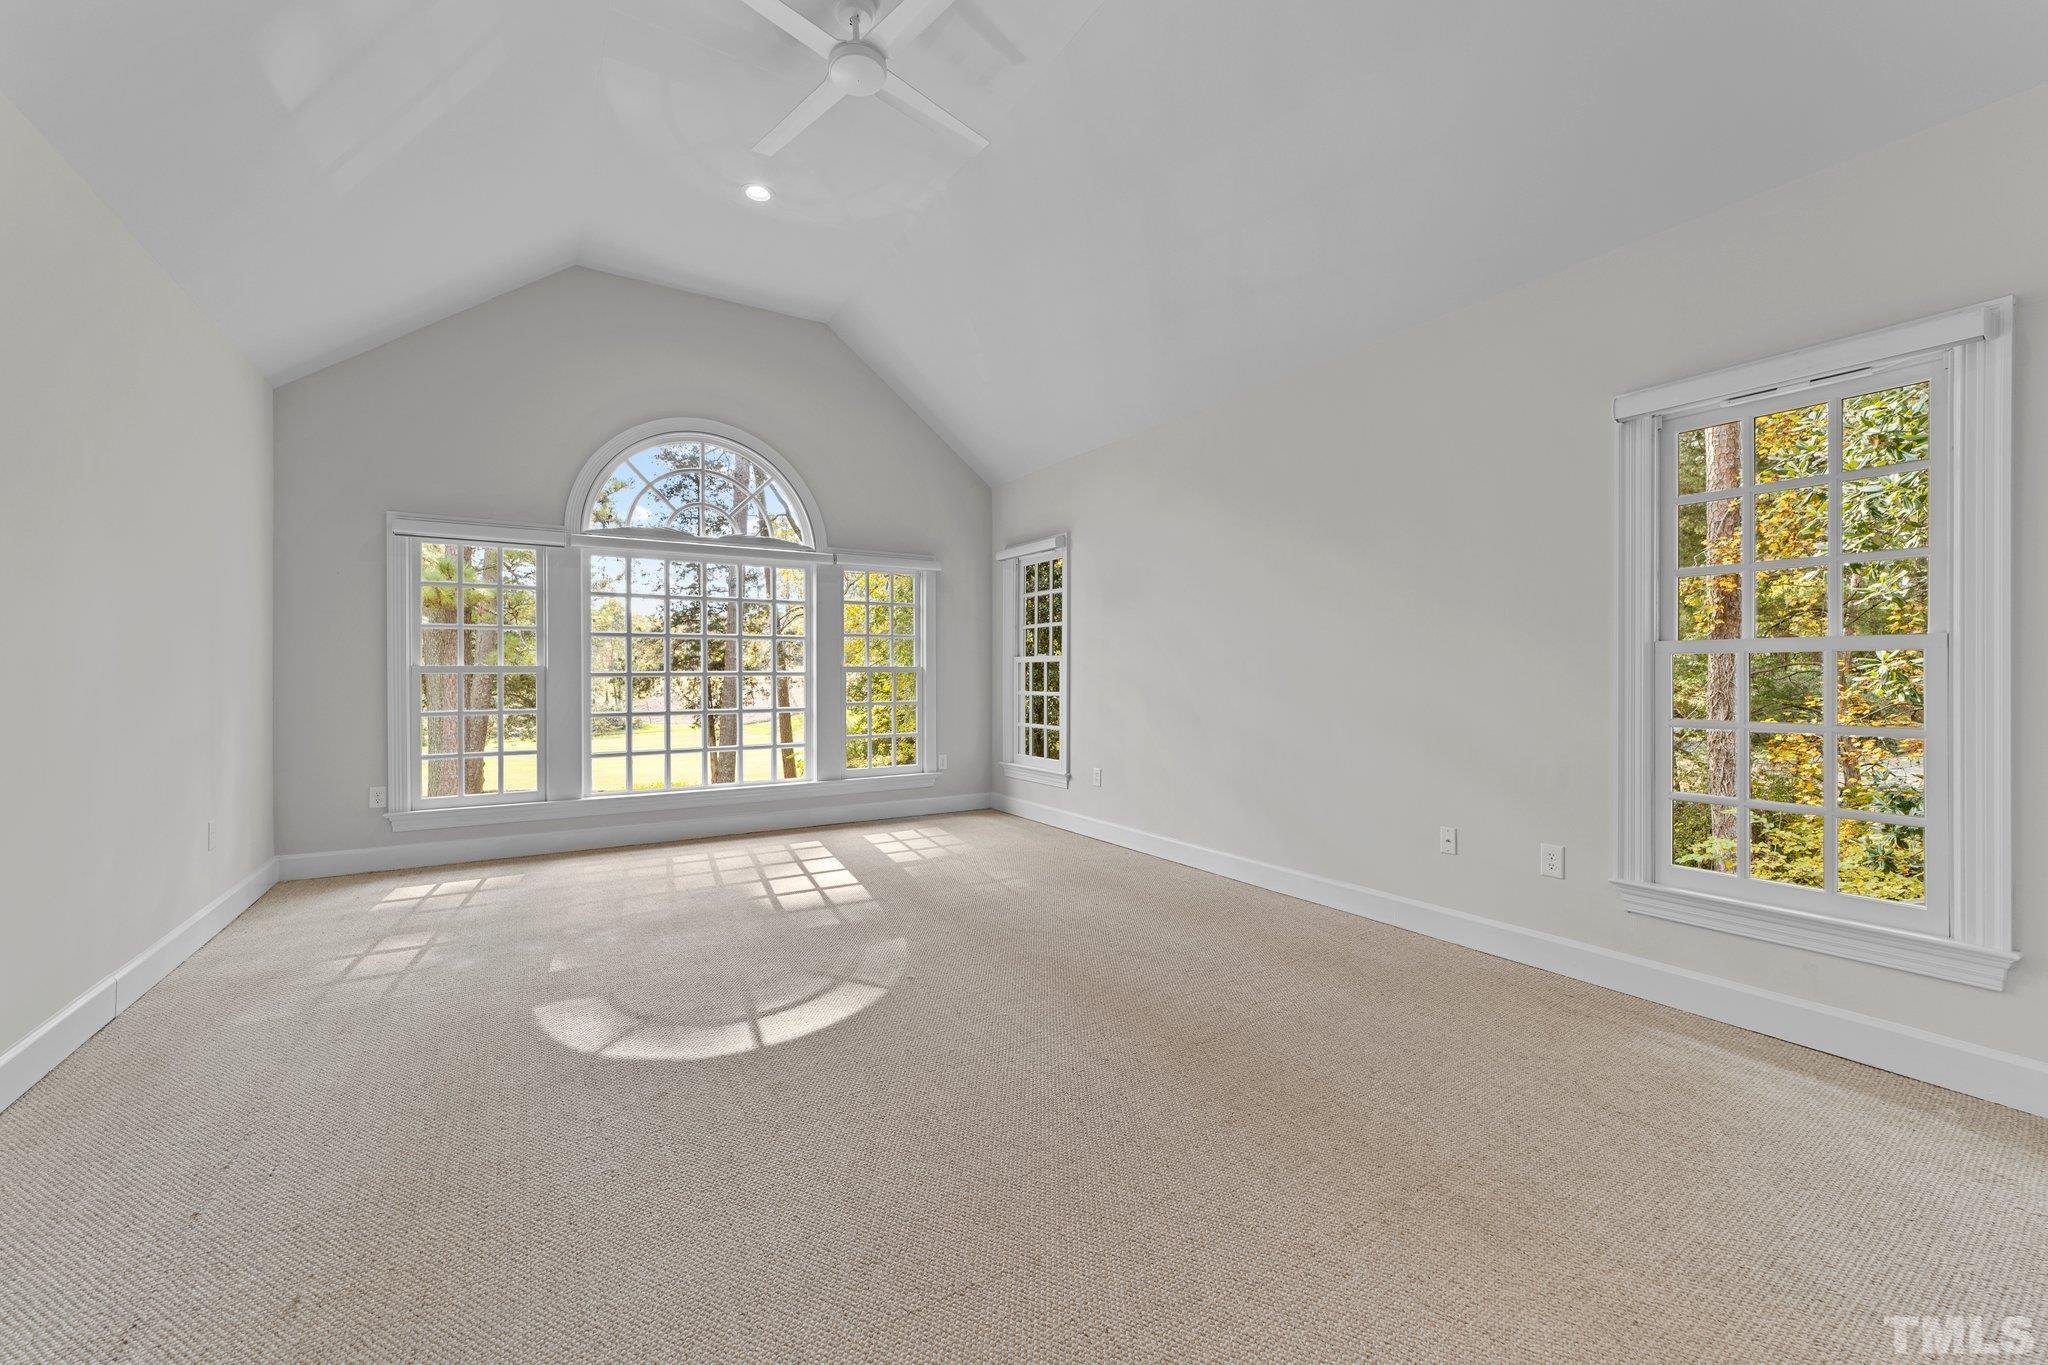 Wonderful vaulted ceiling and gorgeous large windows! Spectacular views of the gardens below and the golf course beyond.